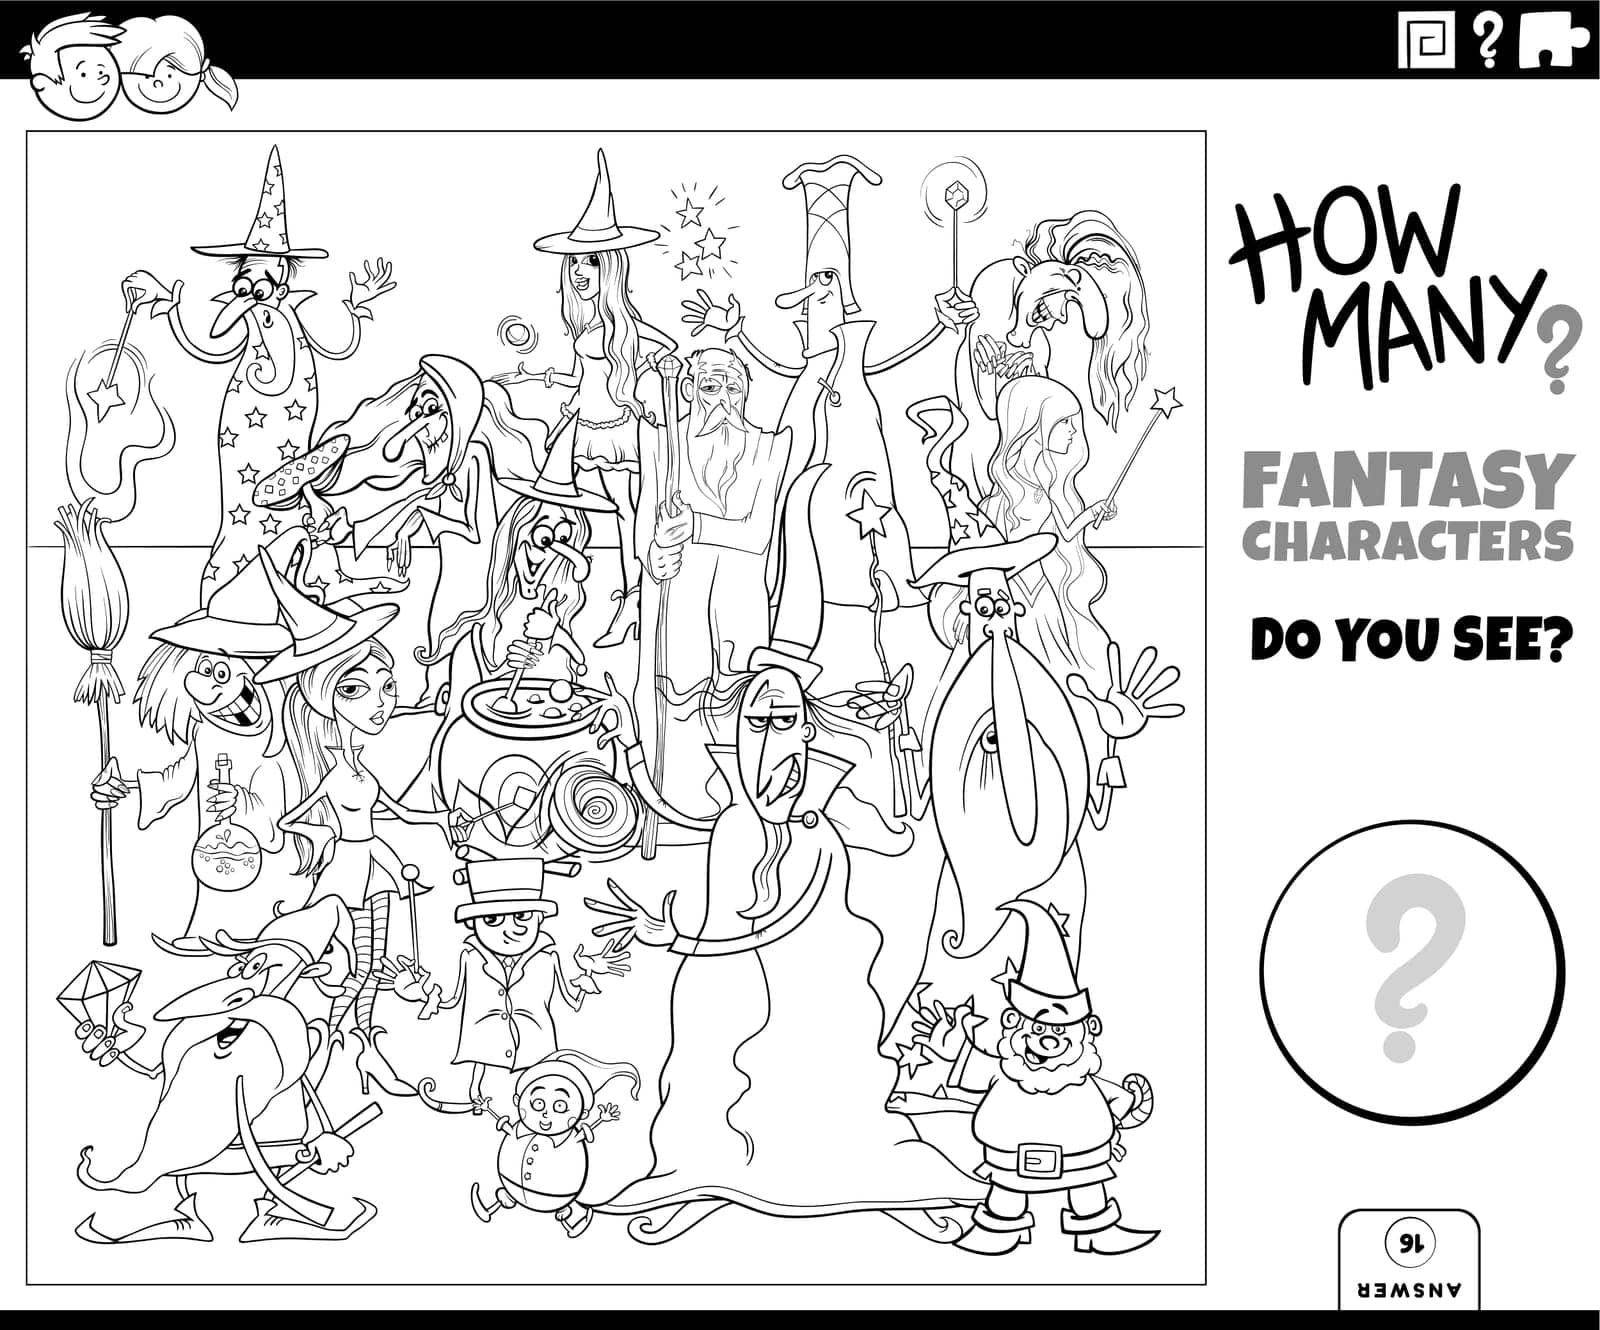 counting cartoon fantasy characters educational activity coloring page by izakowski